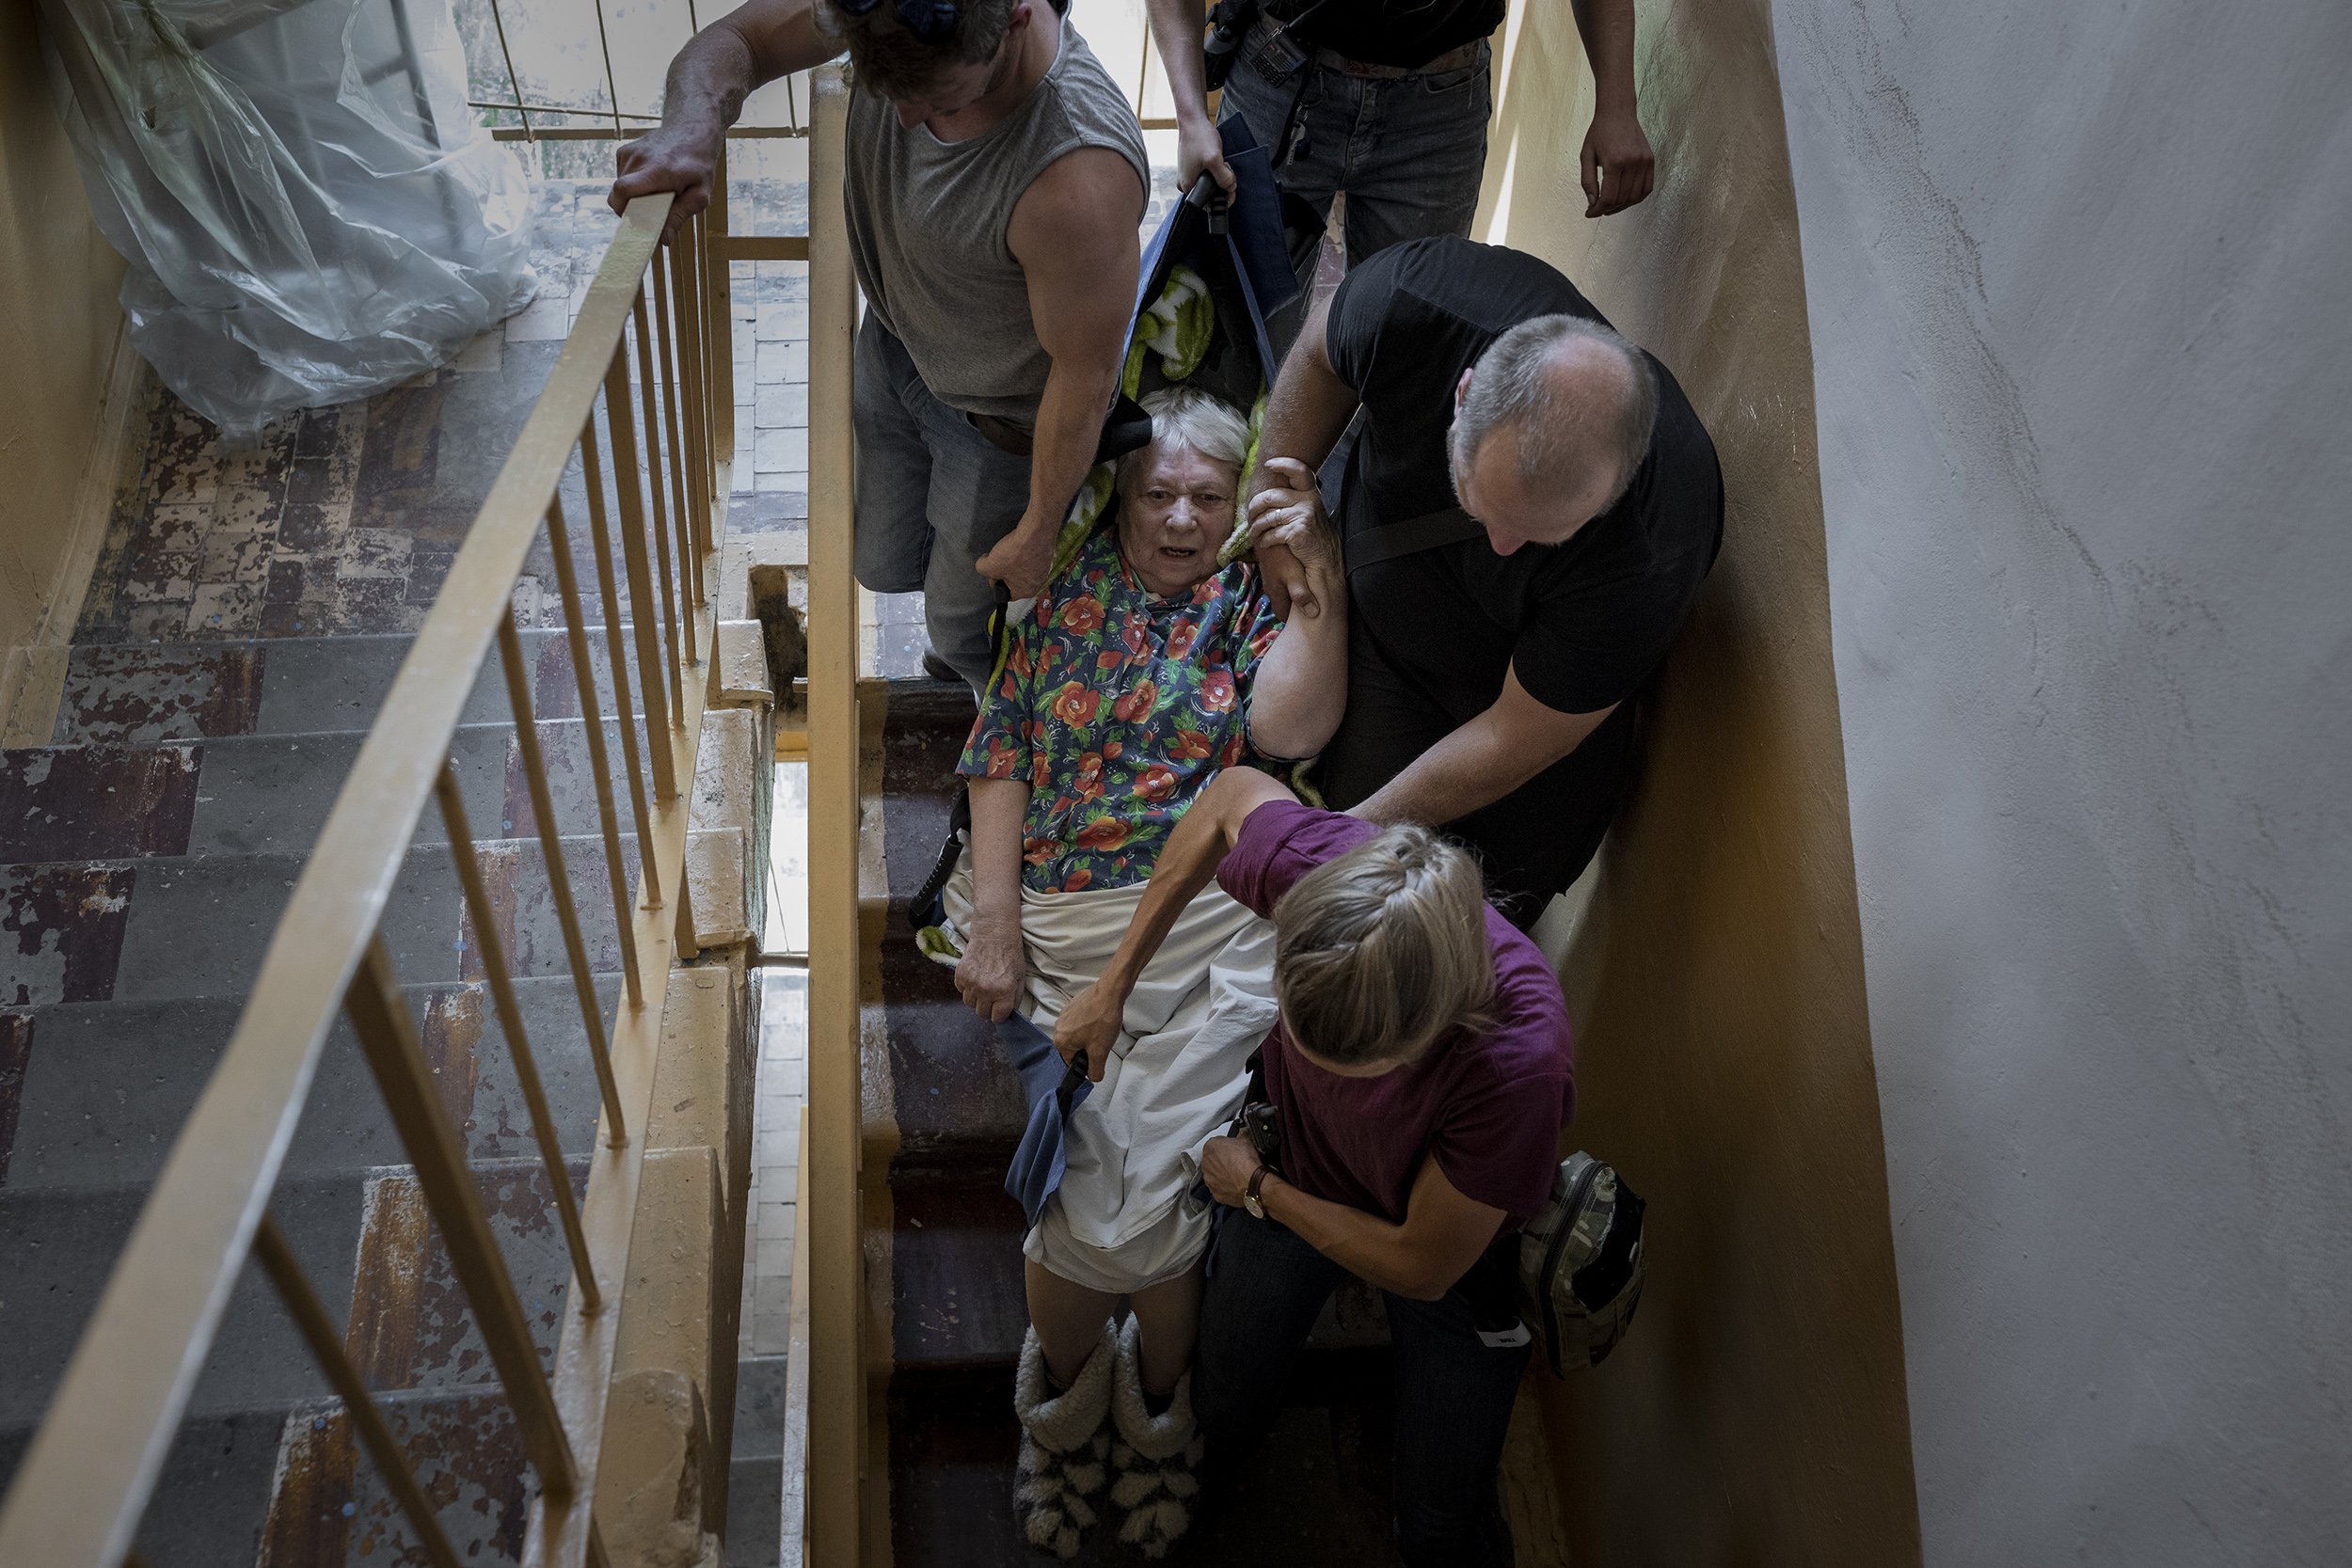  Volunteers from Britain and Ukraine working with the aid organisation Vostok-SOS carried Zinaida Riabtseva, who is 77, blind and struggled to walk down five flights of stairs, during an evacuation mission in Bakhmut. May, 2022. 